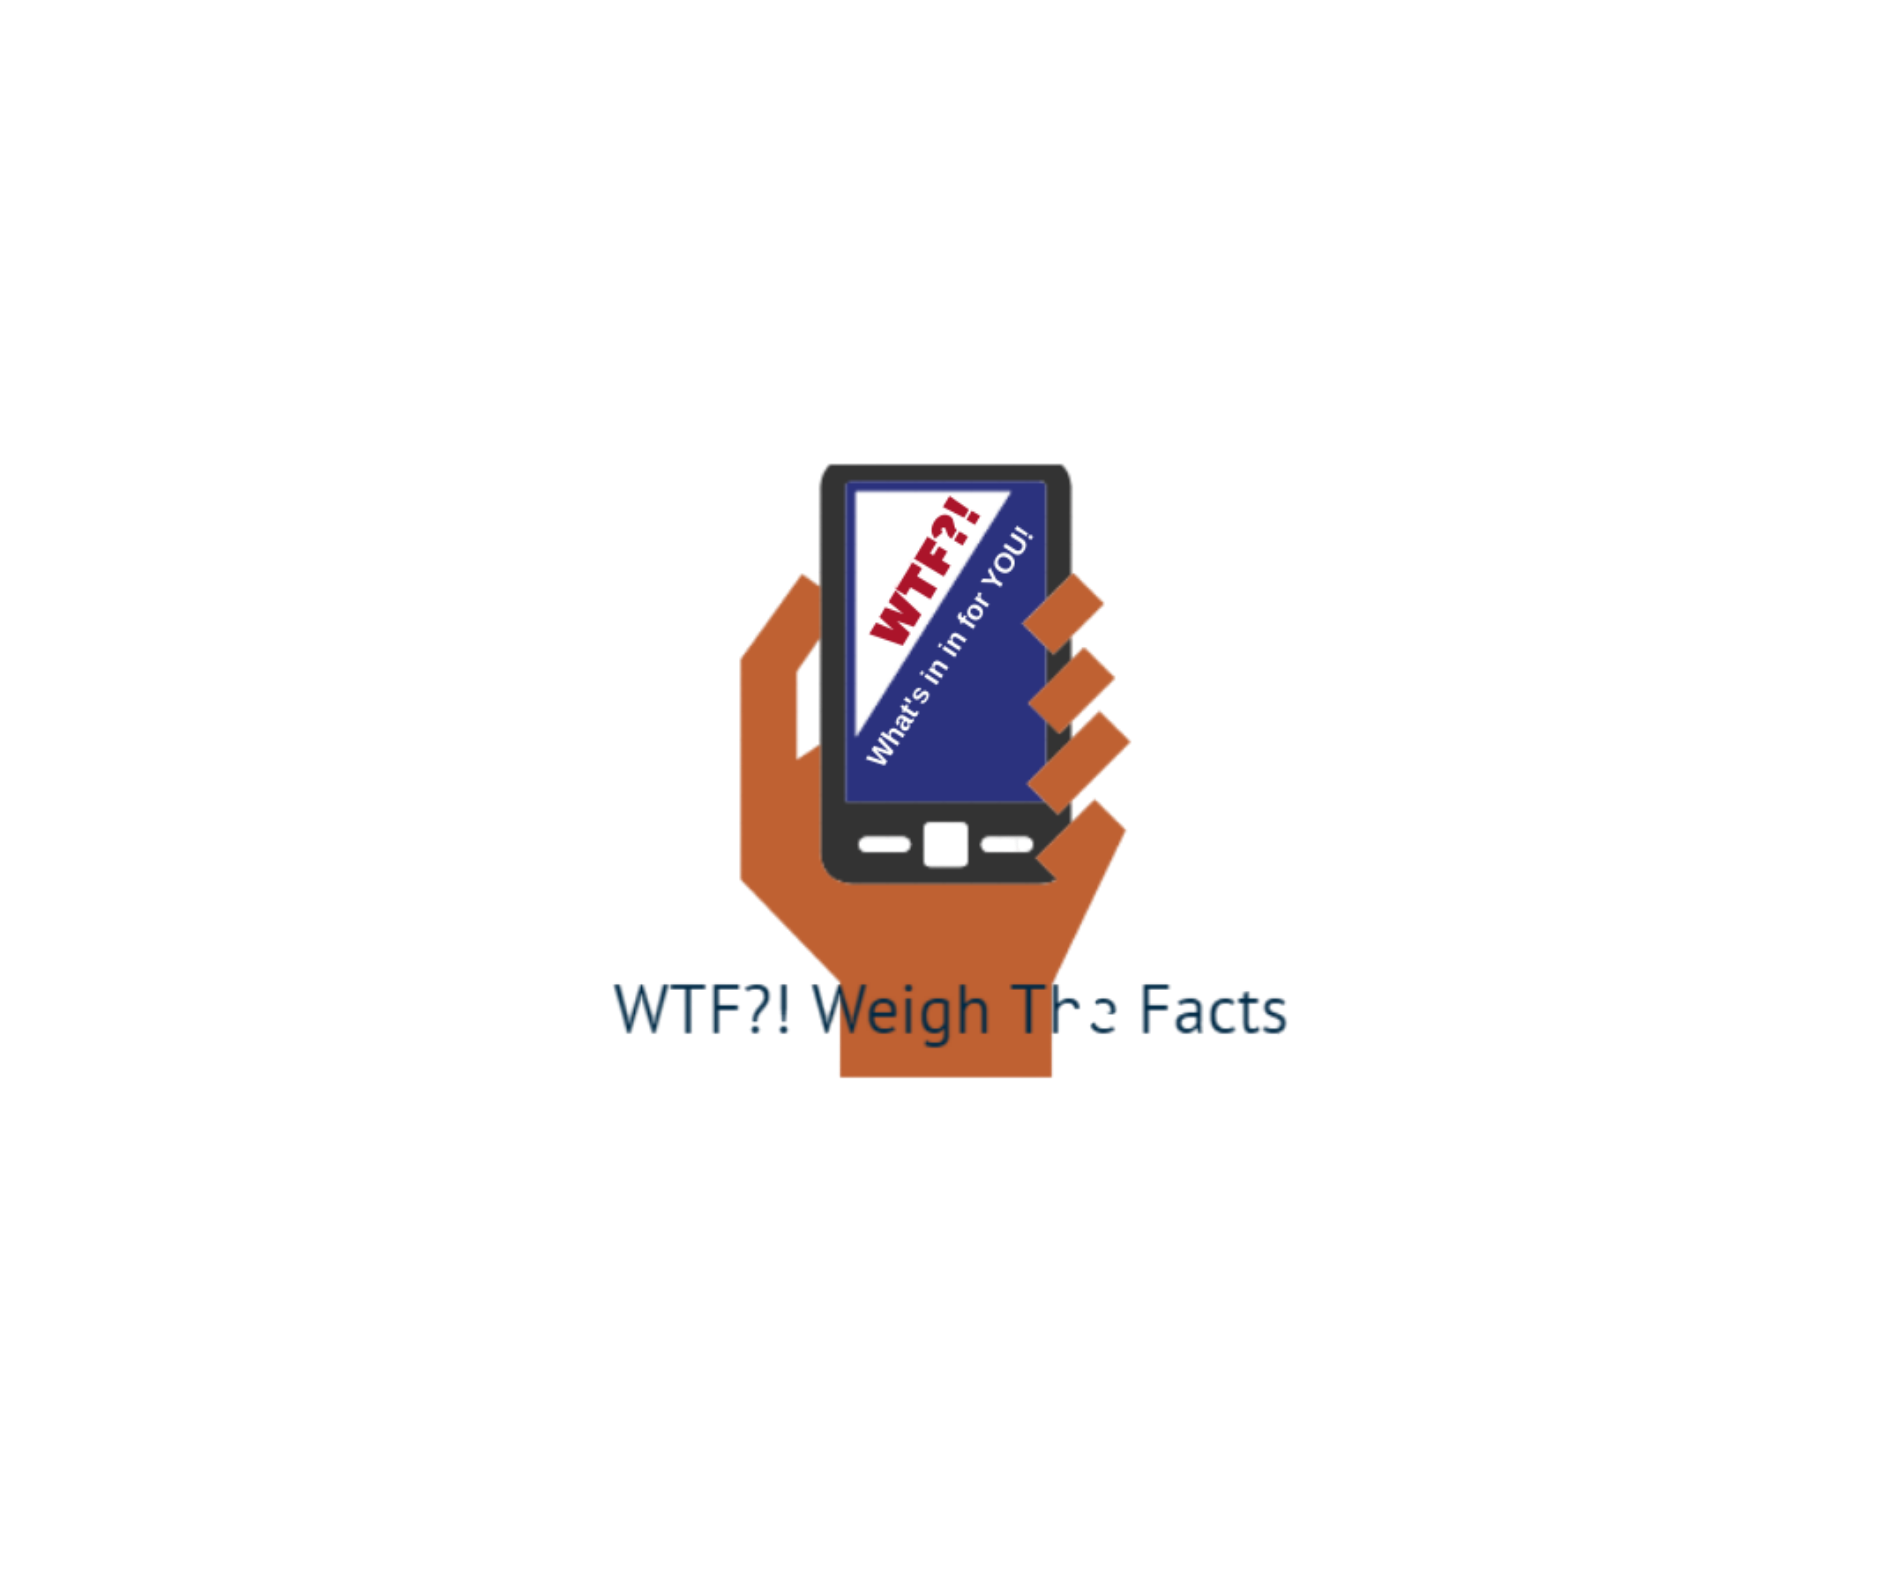 WTF?! Weigh The Facts logo